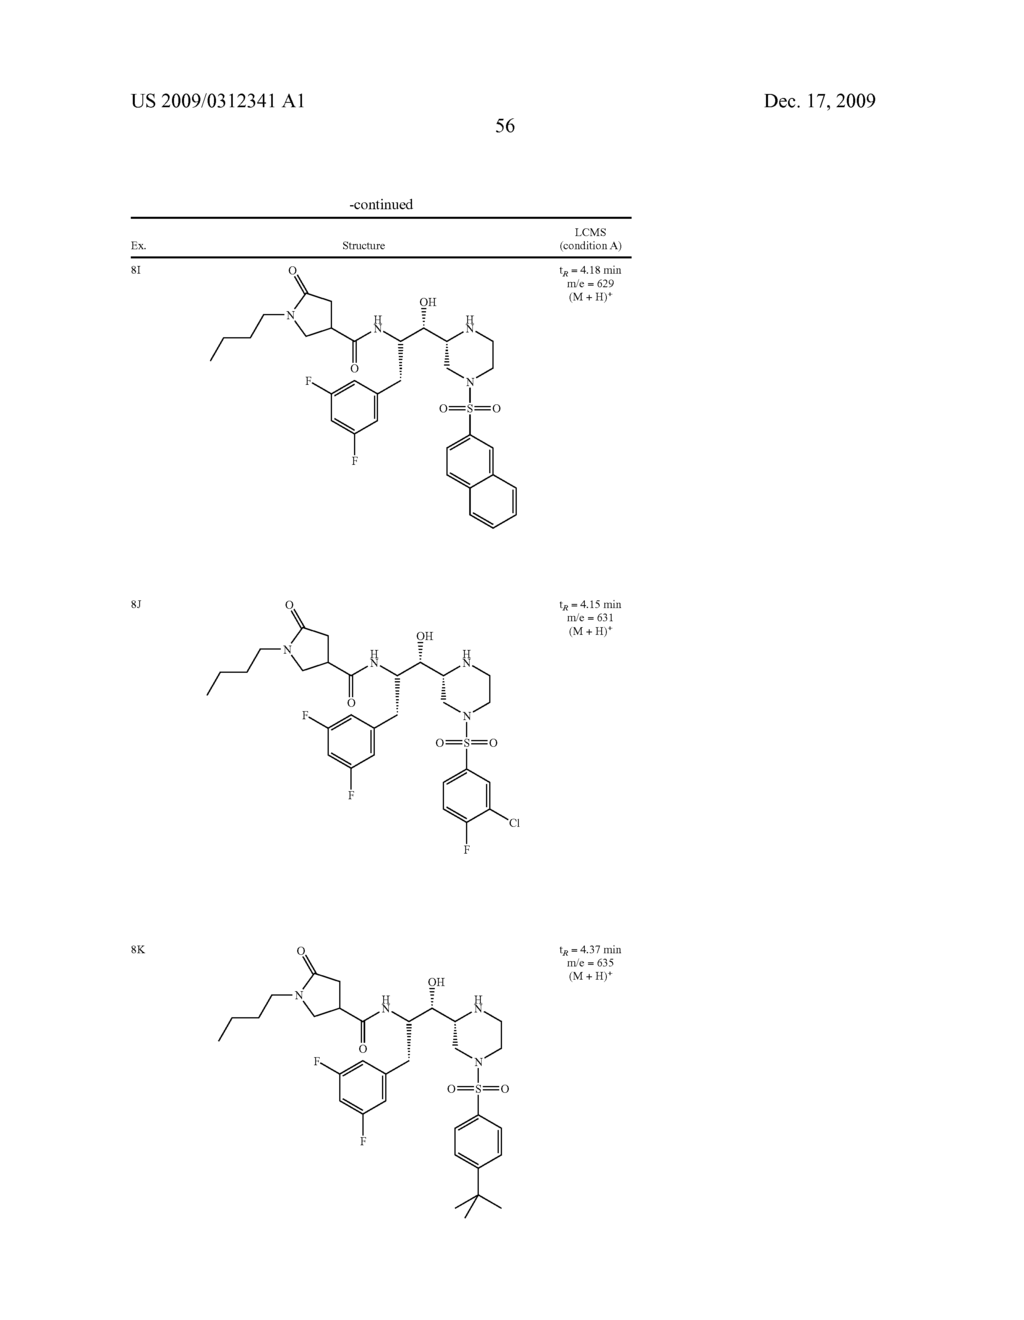 CYCLIC AMINE BACE-1 INHIBITORS HAVING A HETEROCYCLIC SUBSTITUENT - diagram, schematic, and image 57